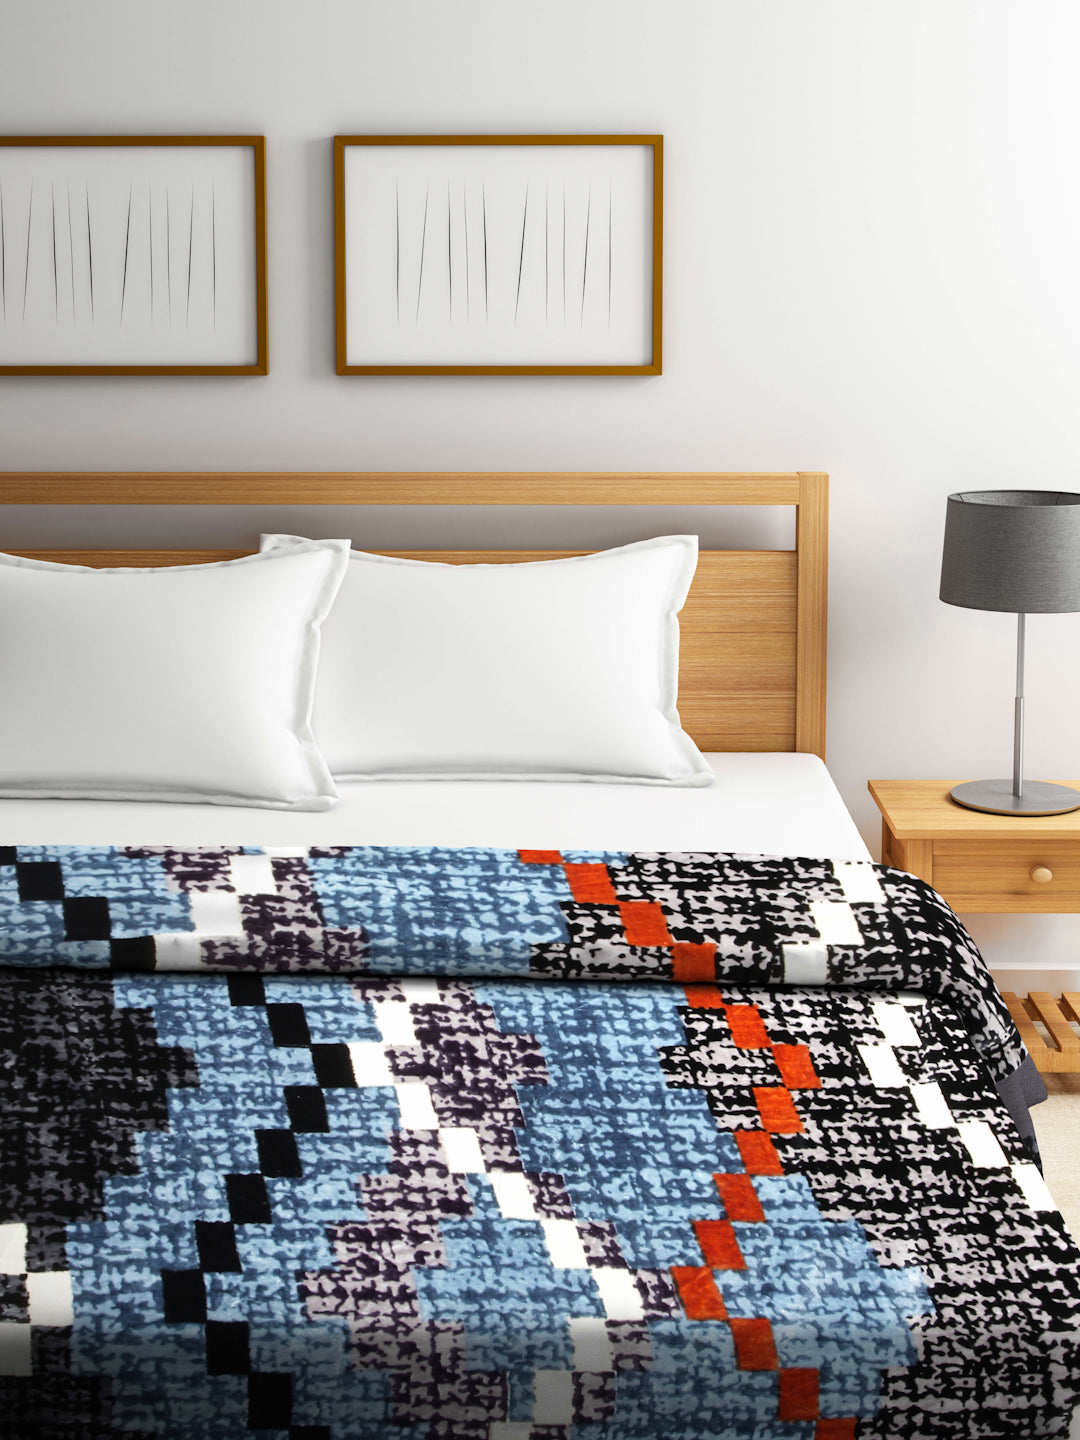 Arrabi Blue Abstract Wool Blend 950 GSM Full Size Double Bed Blanket (240 X 200 cm)